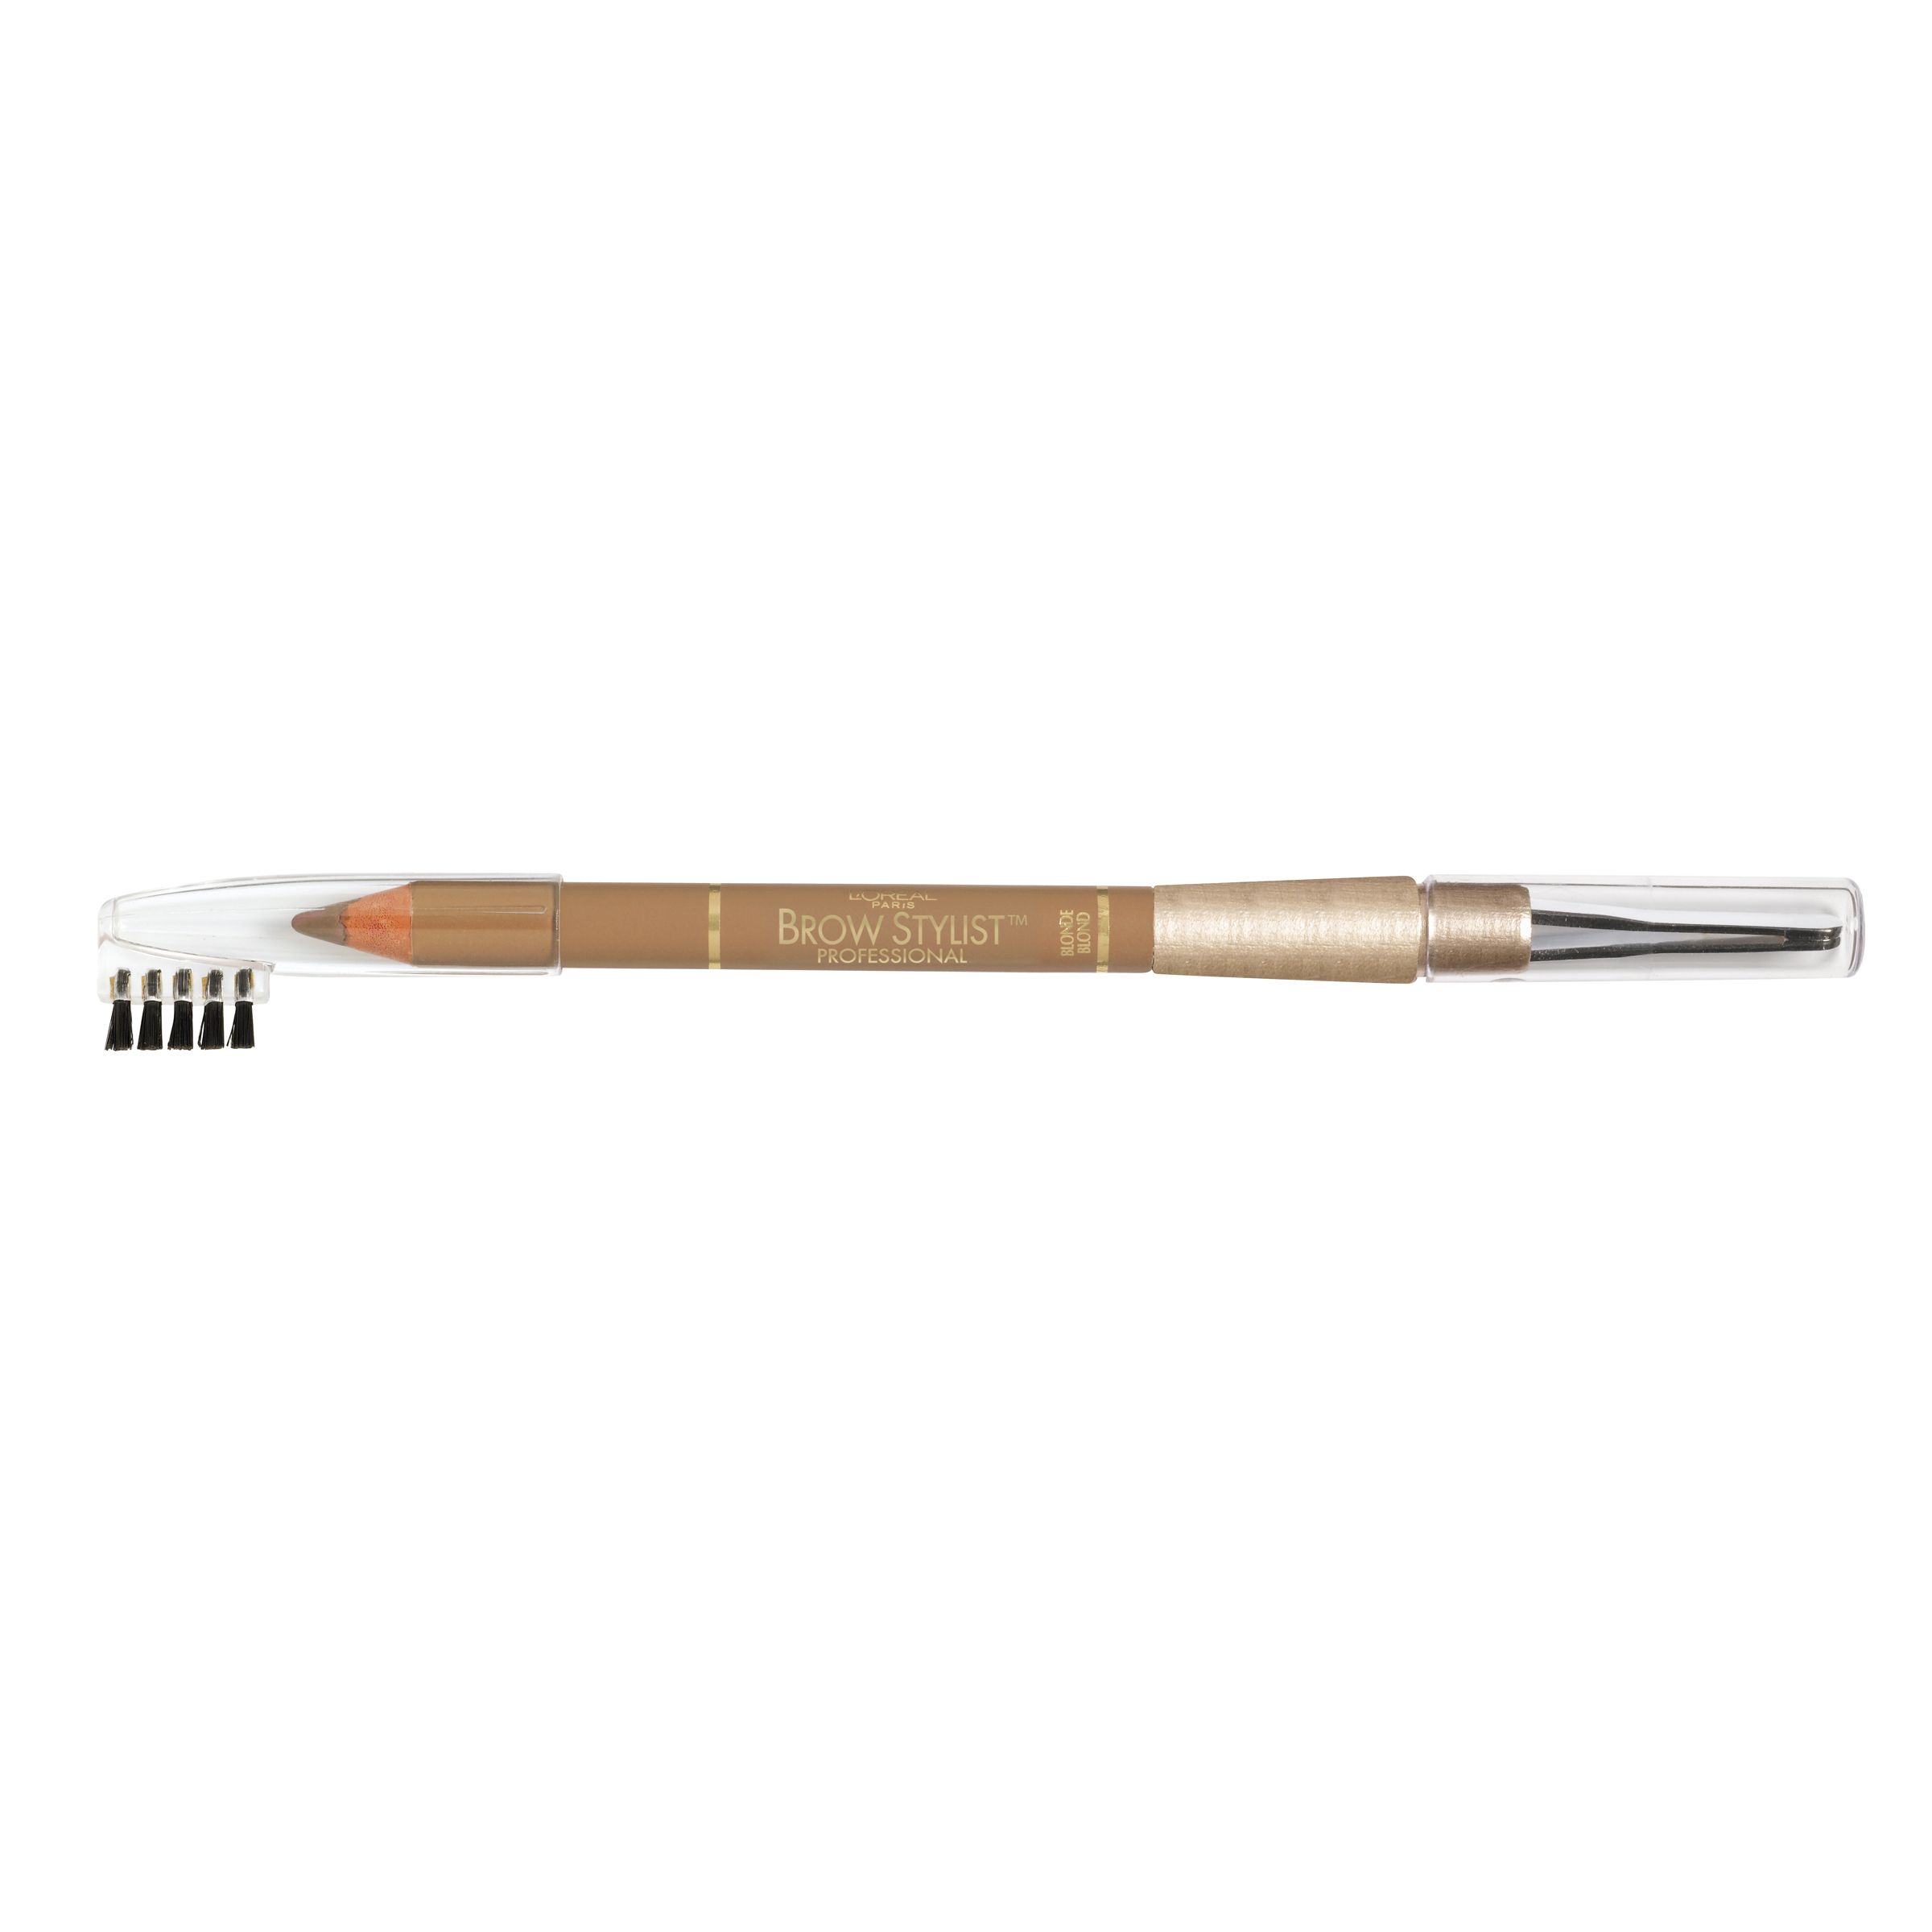 L'Oreal Brow Stylist Brow Shaping Pencils